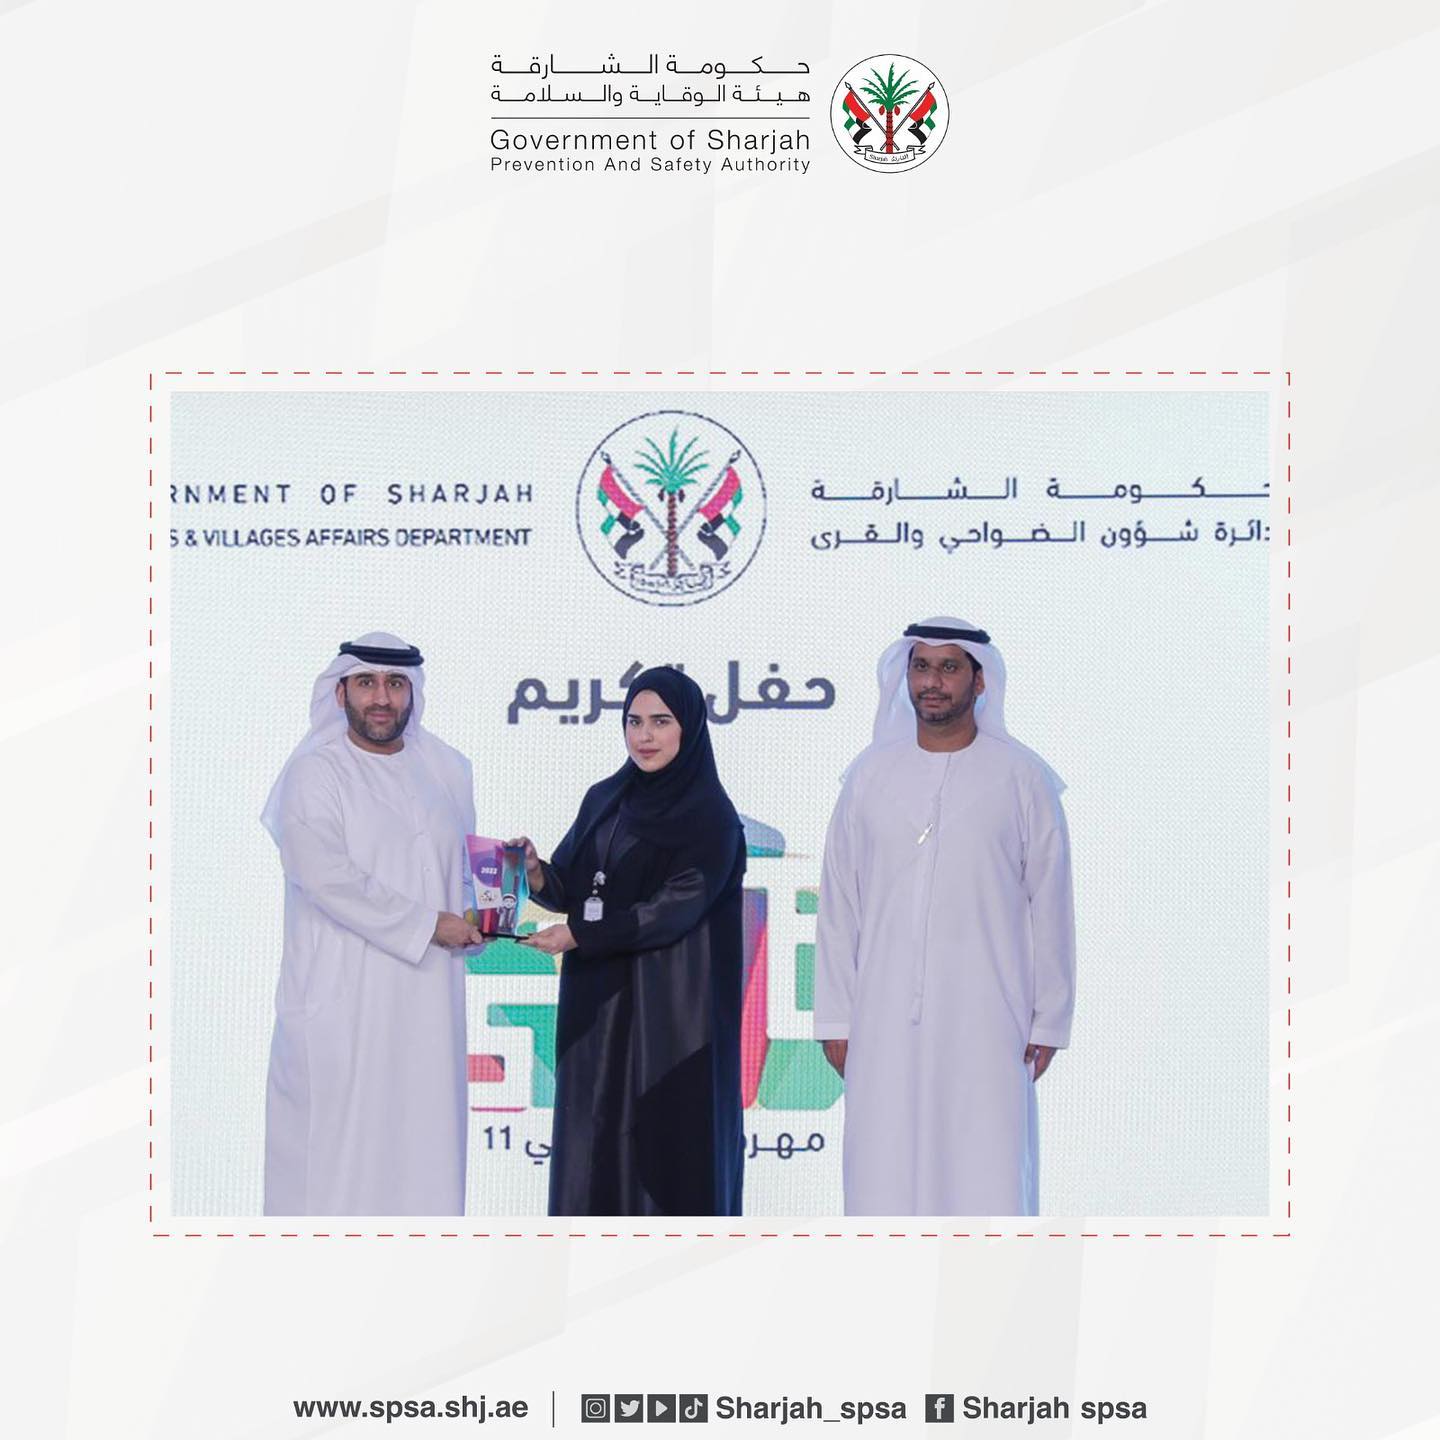 Districts and Villages Affairs Department honors the Prevention and Safety Authority